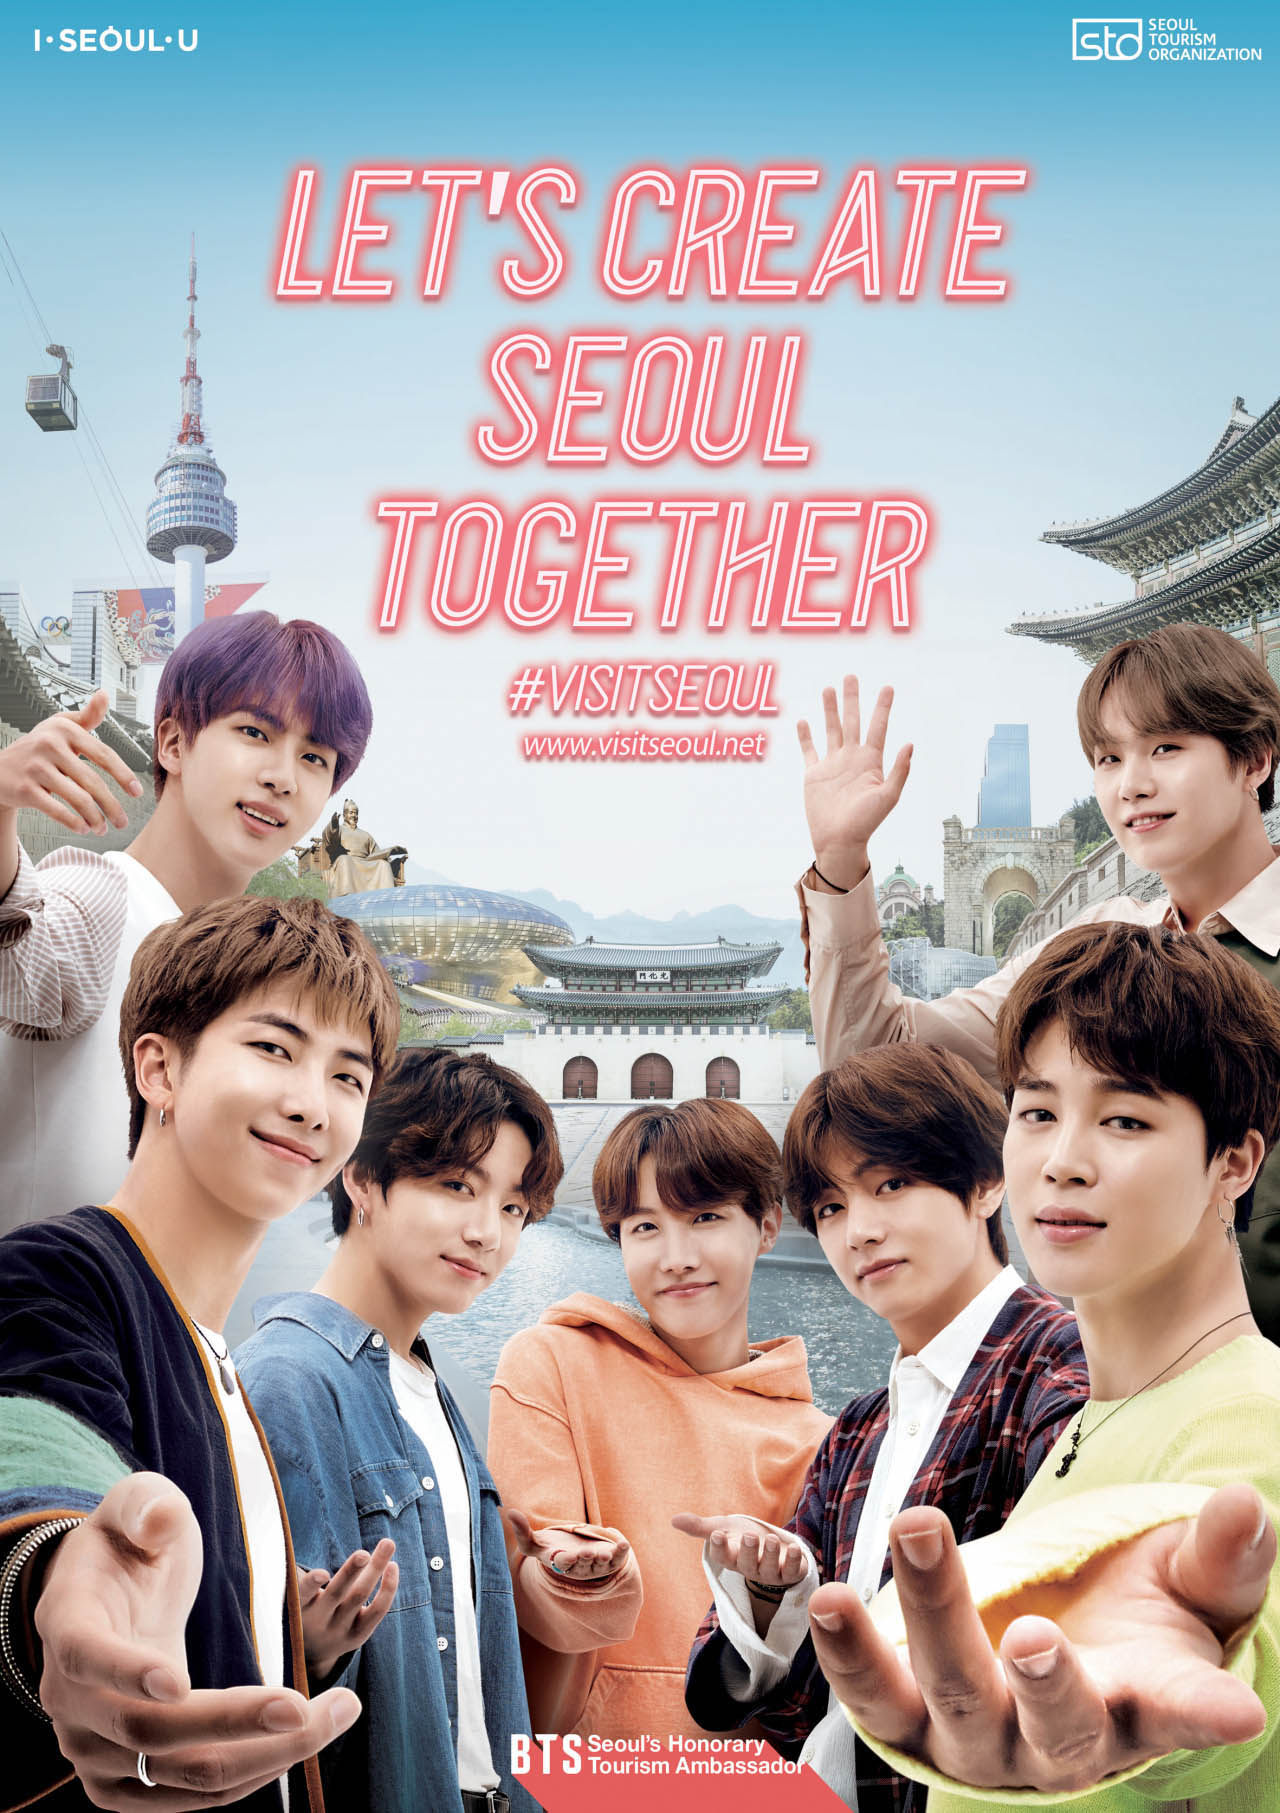 BTS are honorary tourism ambassadors for Seoul.